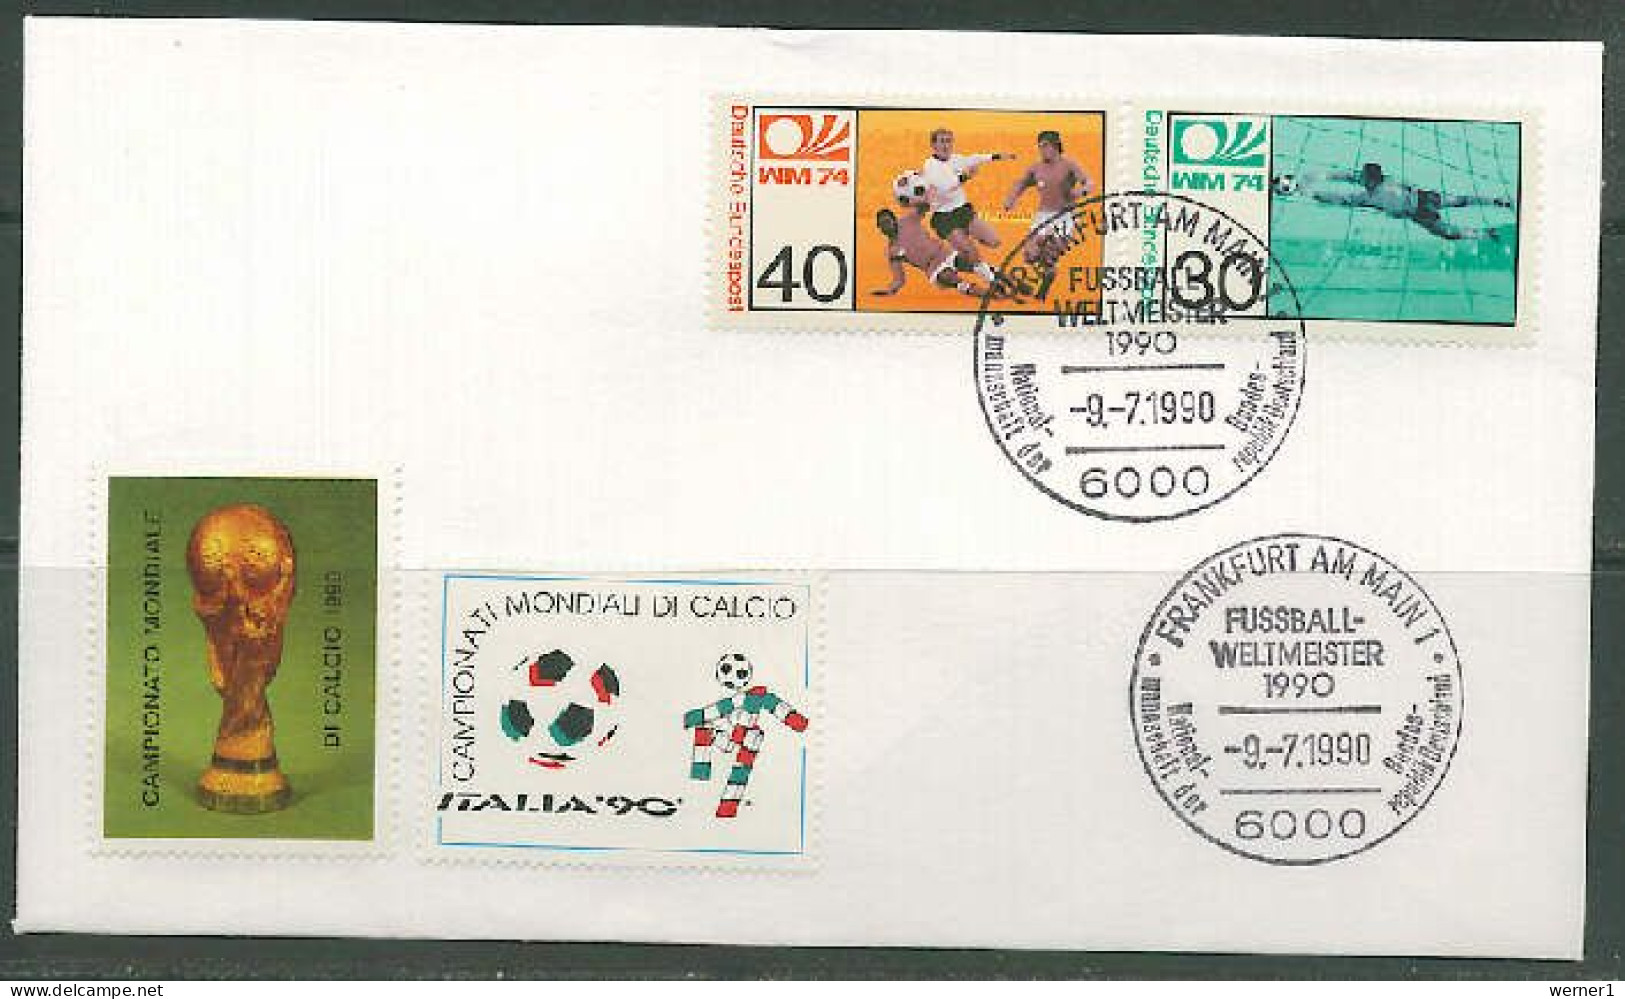 Germany 1990 Football Soccer World Cup Commemorative Cover, Germany World Cup Champion - 1990 – Italia